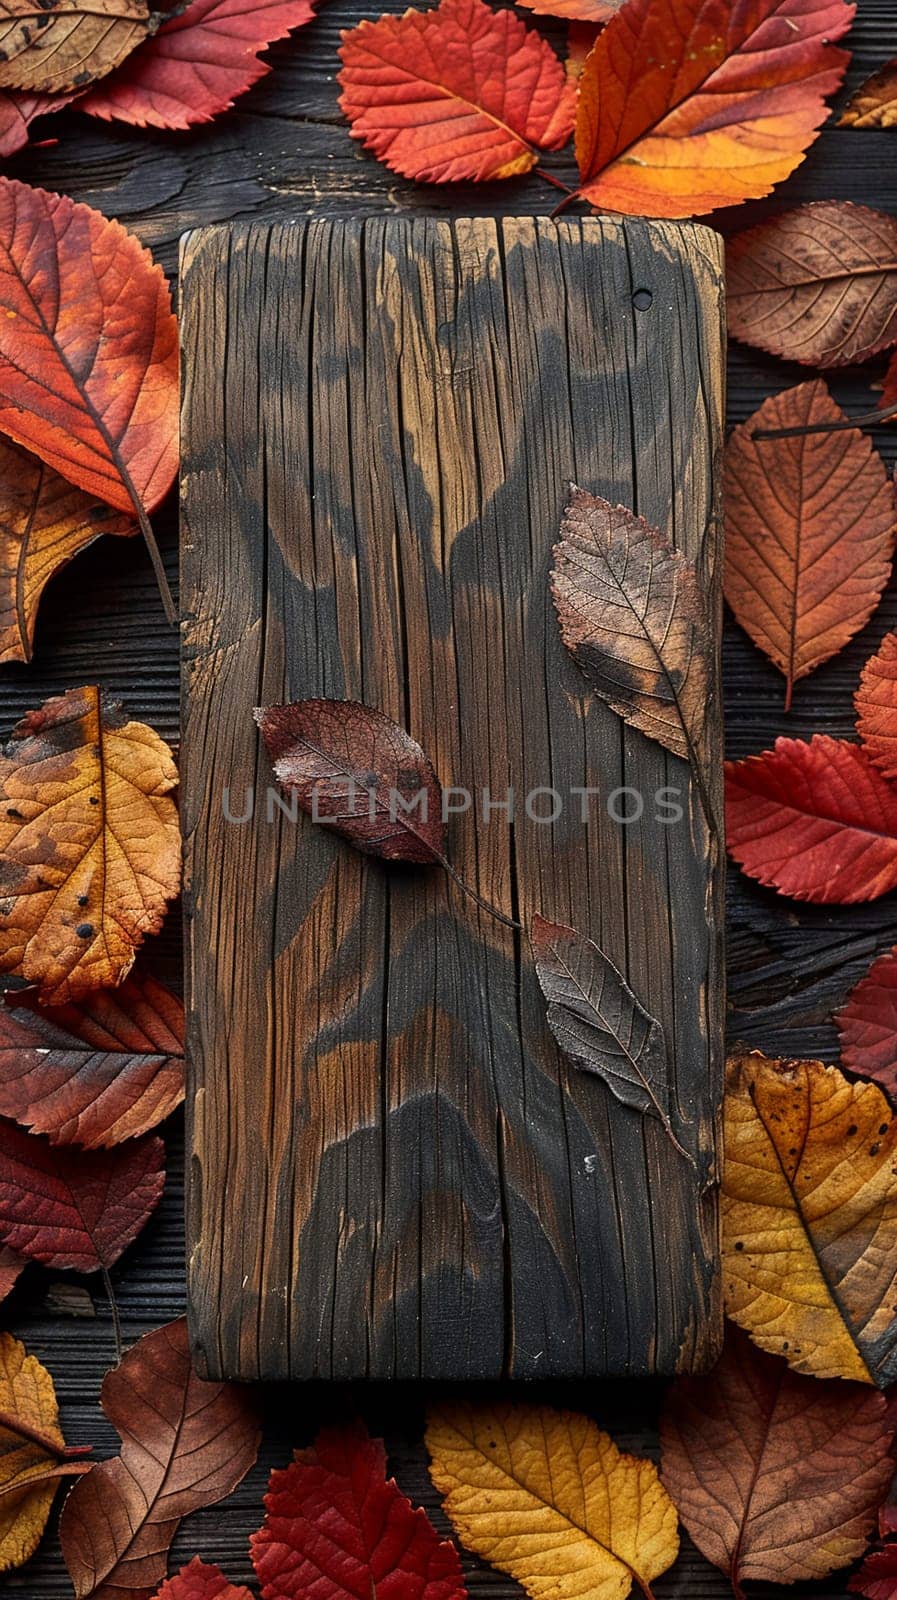 Stained Wood Block on an Autumn Leaves Background, The wood grains merge with the fall colors, evoking seasonal beauty trends.